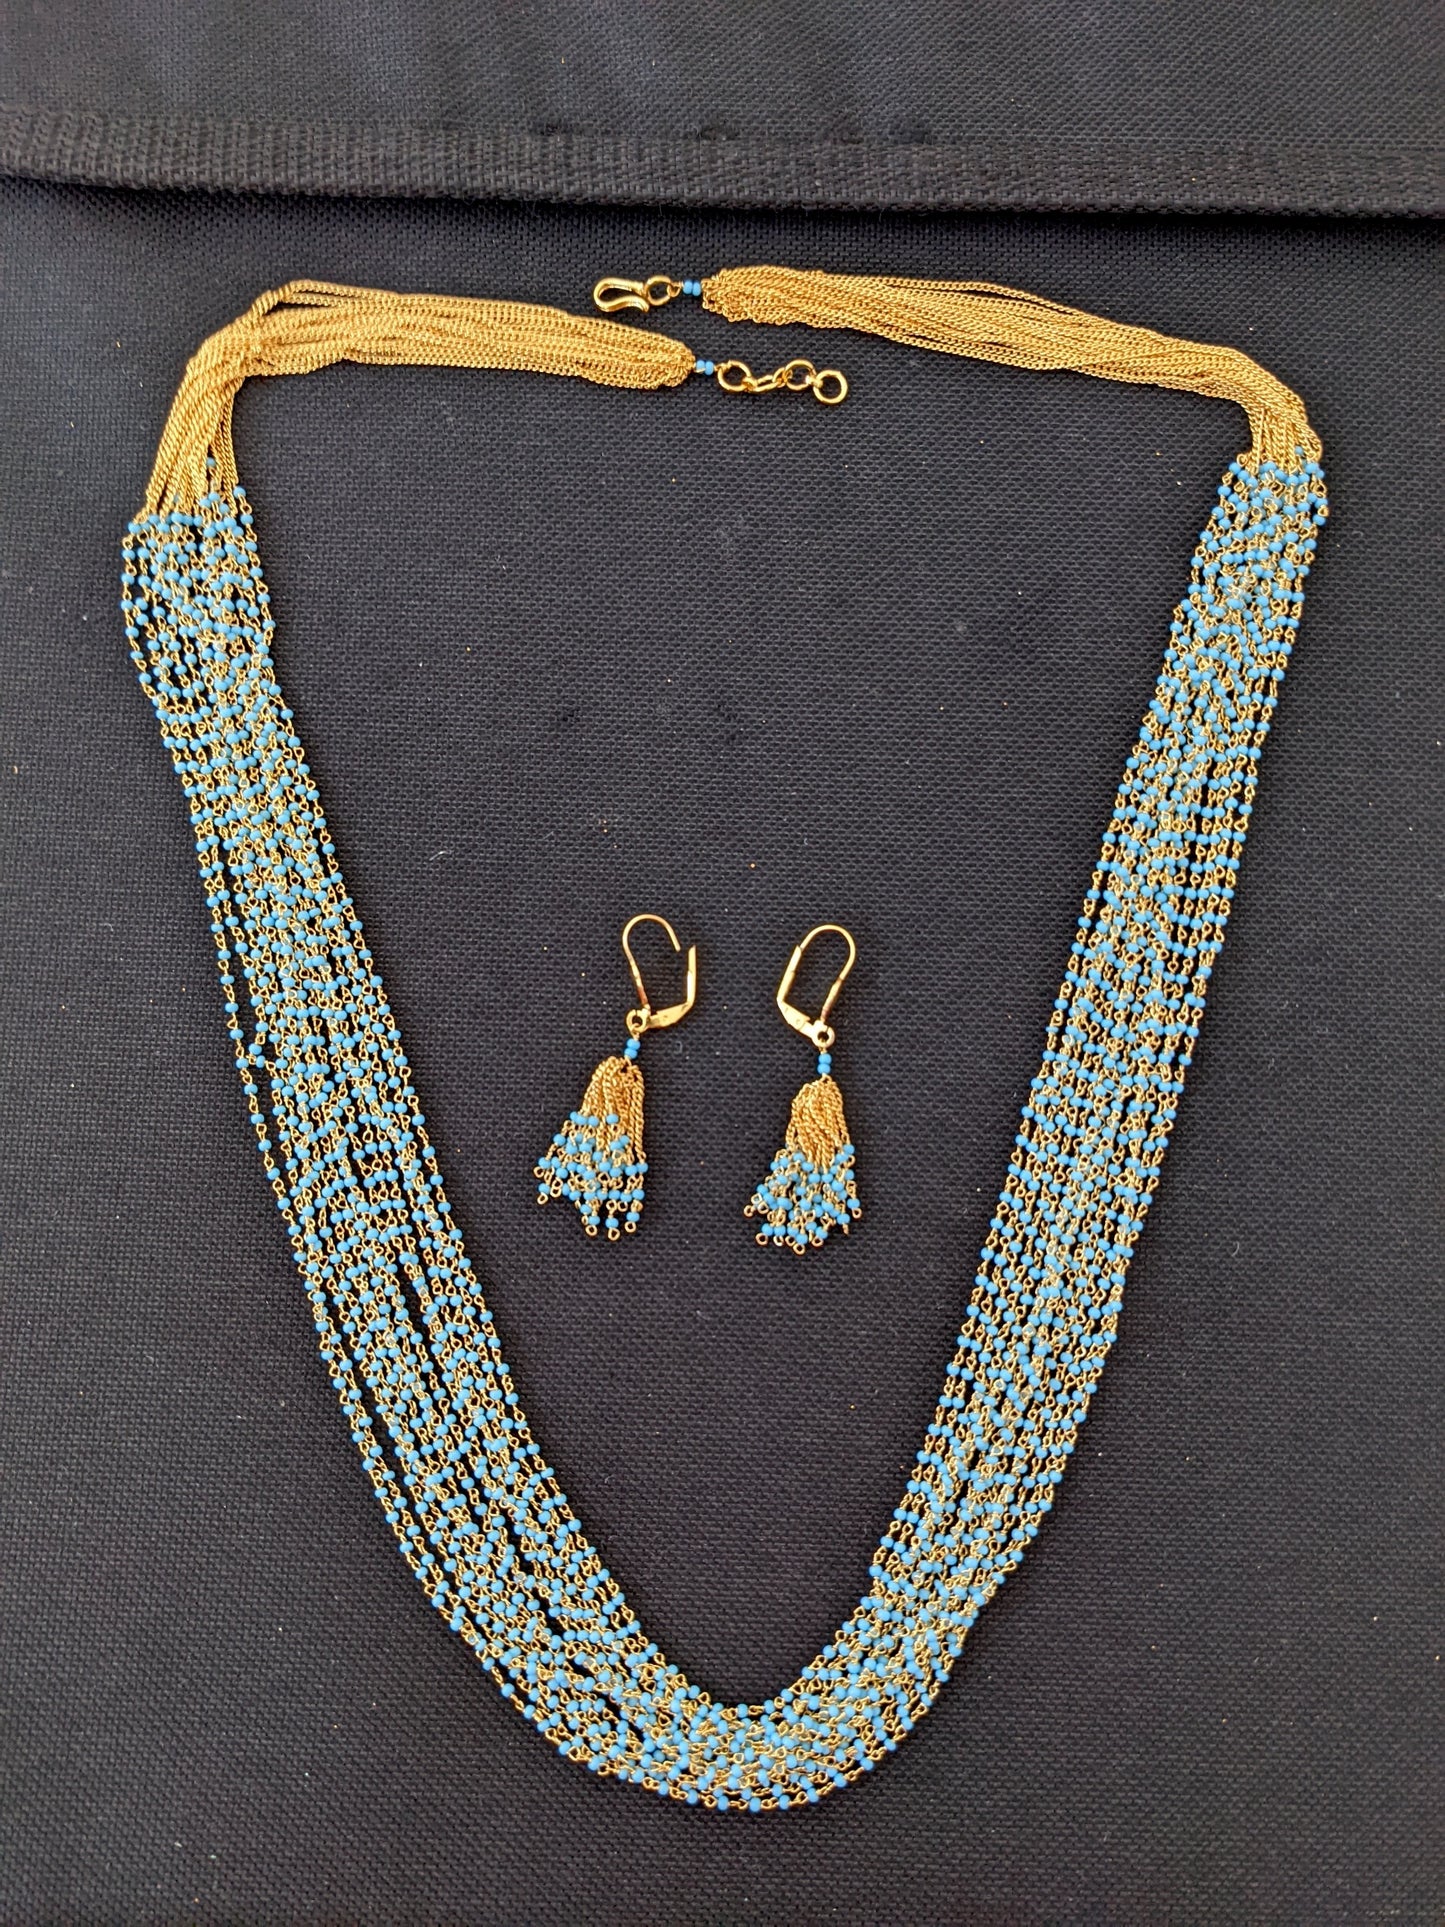 Multi stranded tiny bead Long Chain Necklace and earrings set